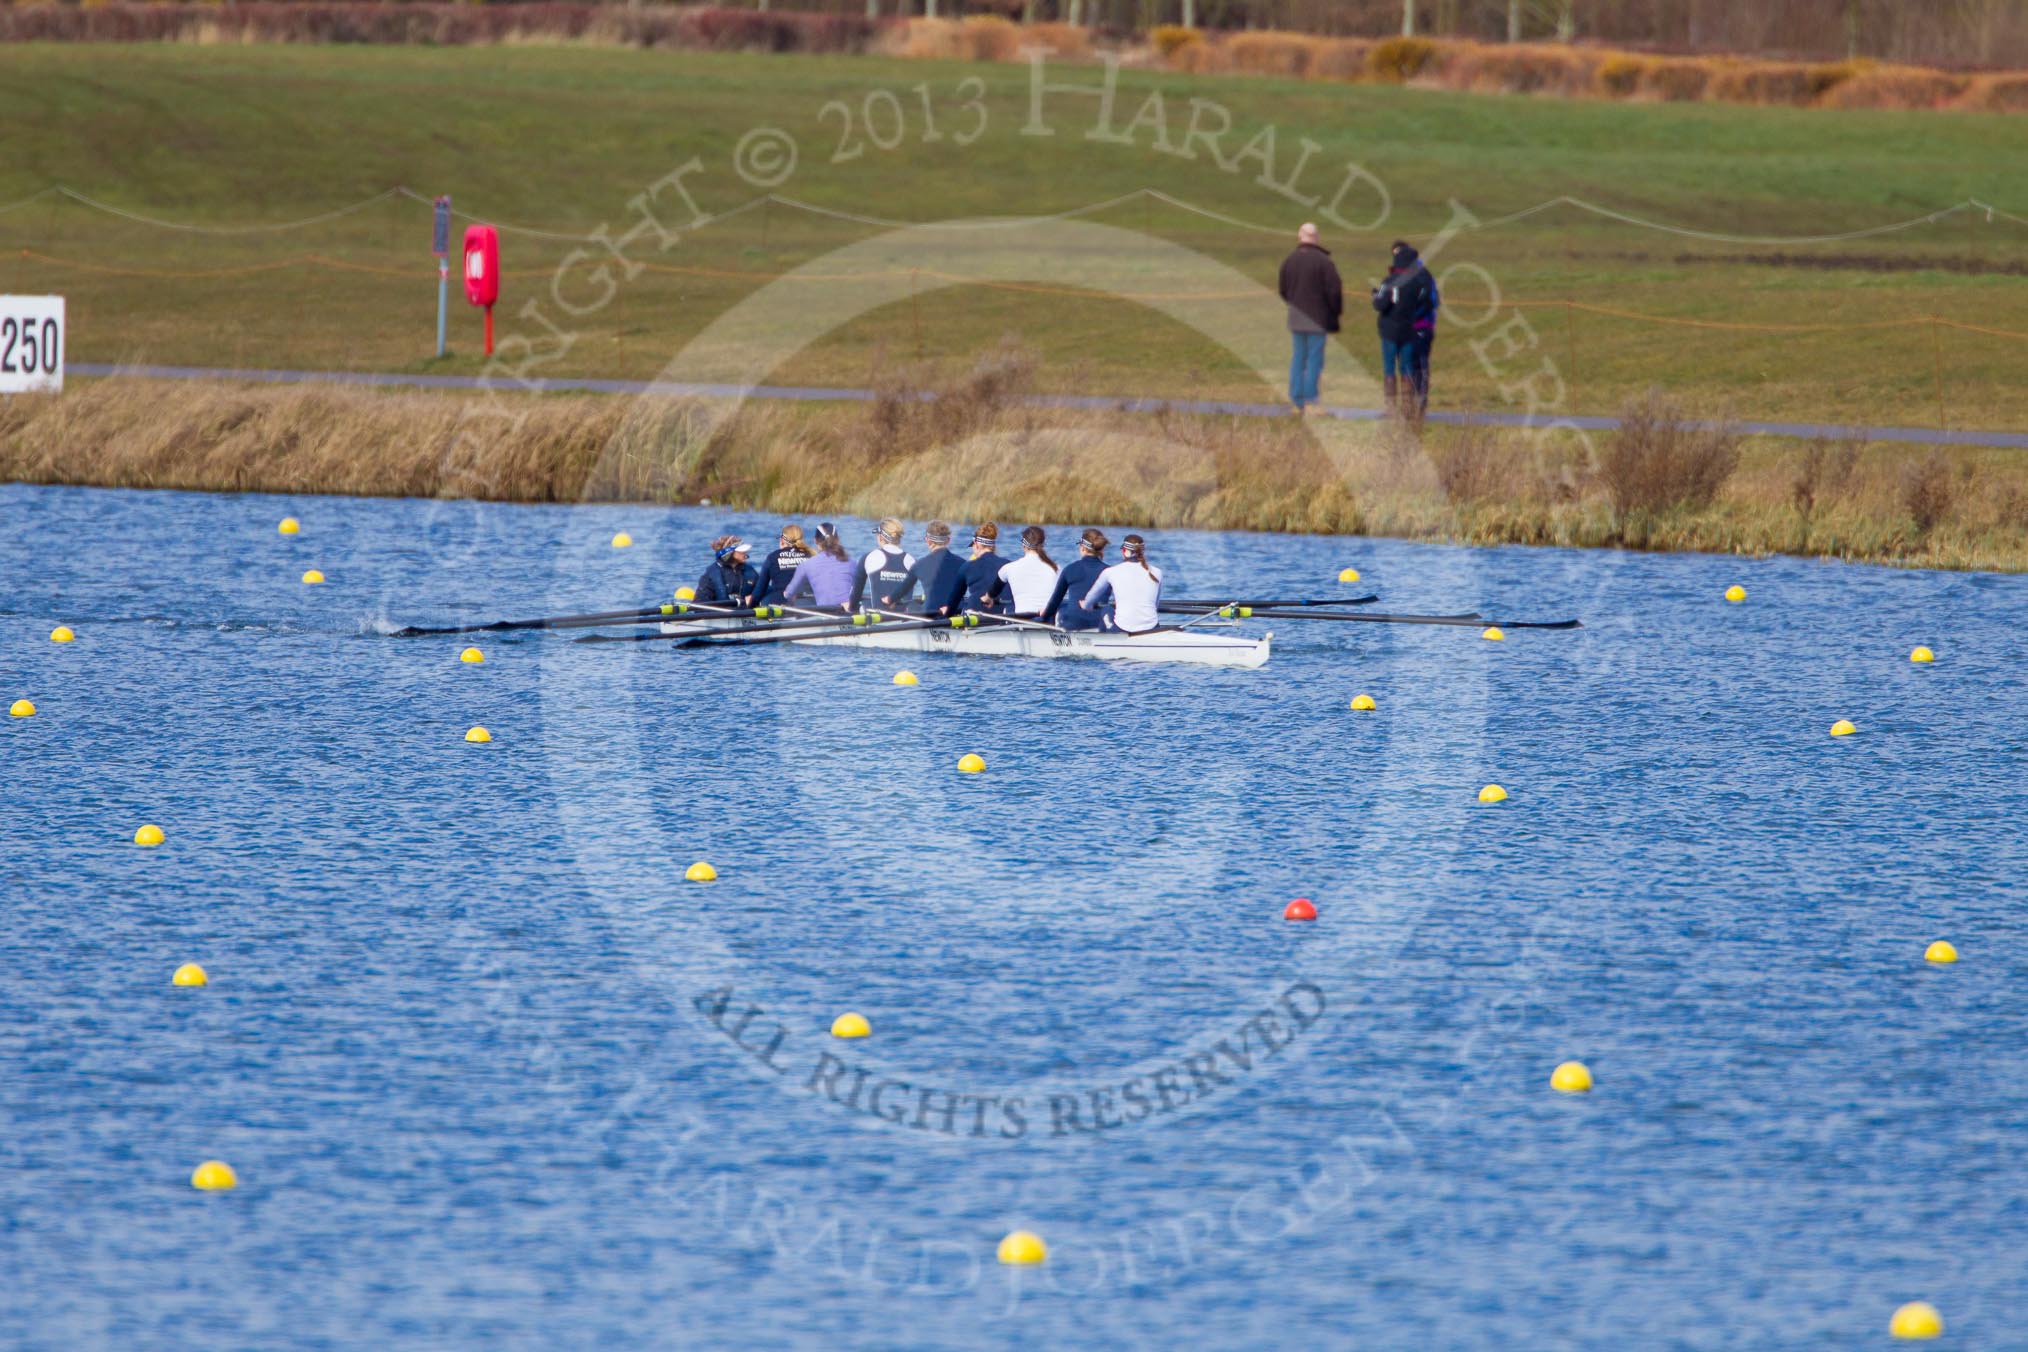 The Boat Race season 2013 - fixture OUWBC vs Olympians: The OUWBC reserve boat Osiris about to race the Blue Boat and the Olympians in a fixture at Dorney Lake..
Dorney Lake,
Dorney, Windsor,
Buckinghamshire,
United Kingdom,
on 16 March 2013 at 12:15, image #188